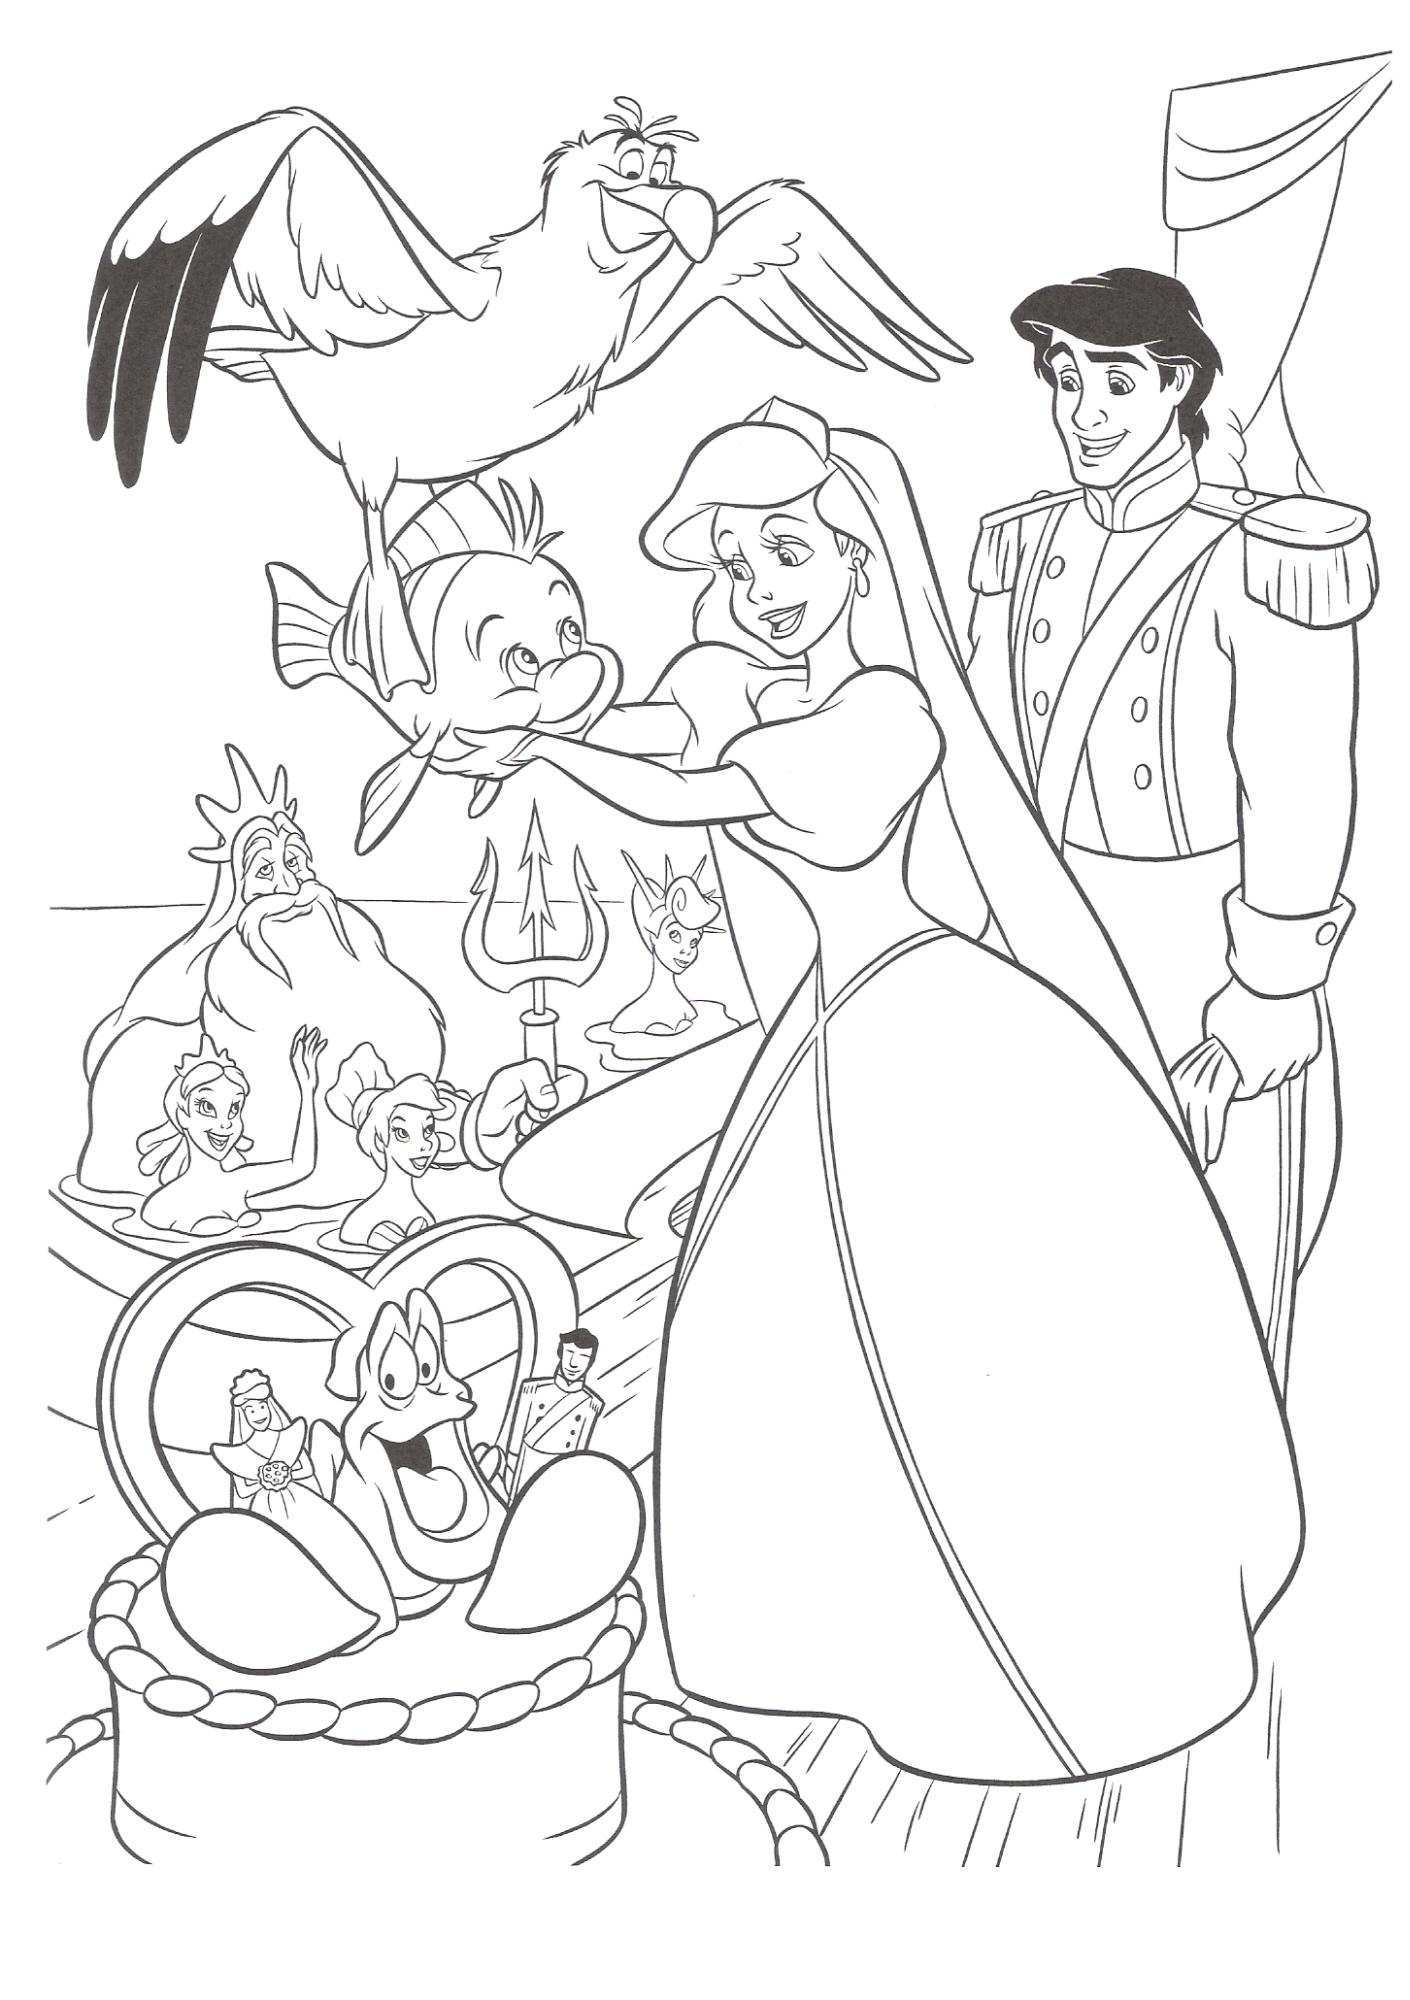 Coloring Pages : Disney Little Mermaid Coloring At Getdrawings The ...